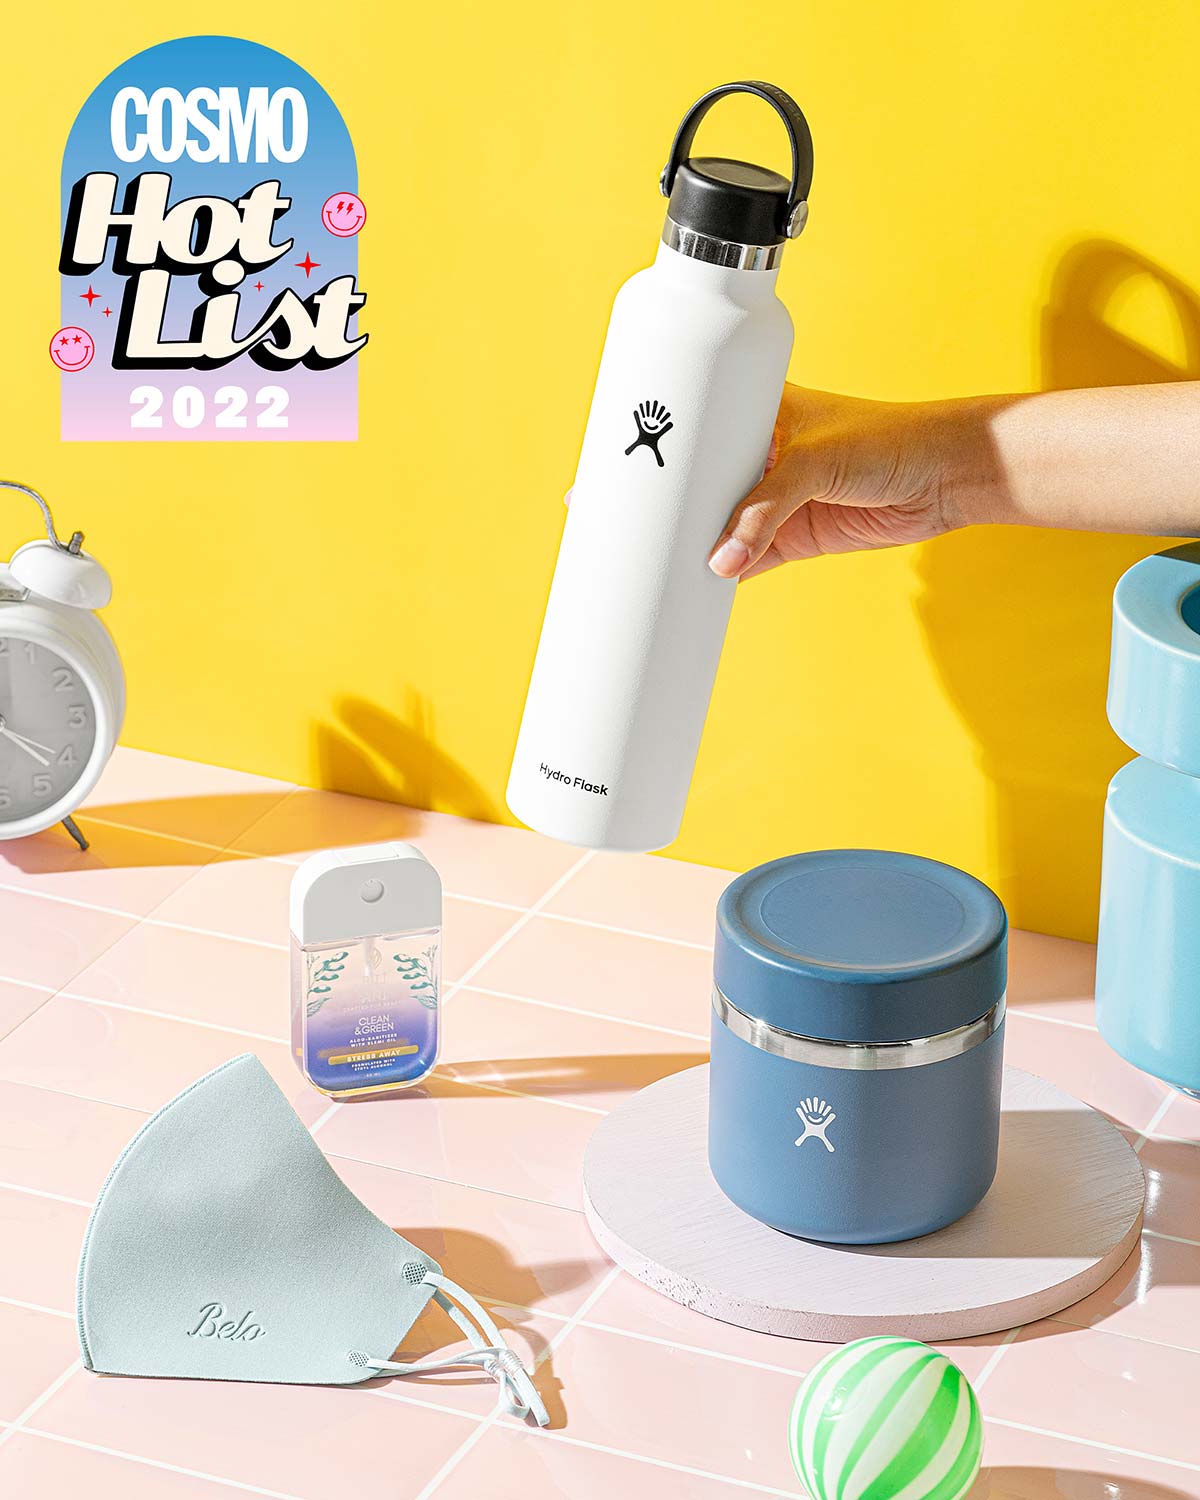 cosmo ph hot list 2022 - best back to work products